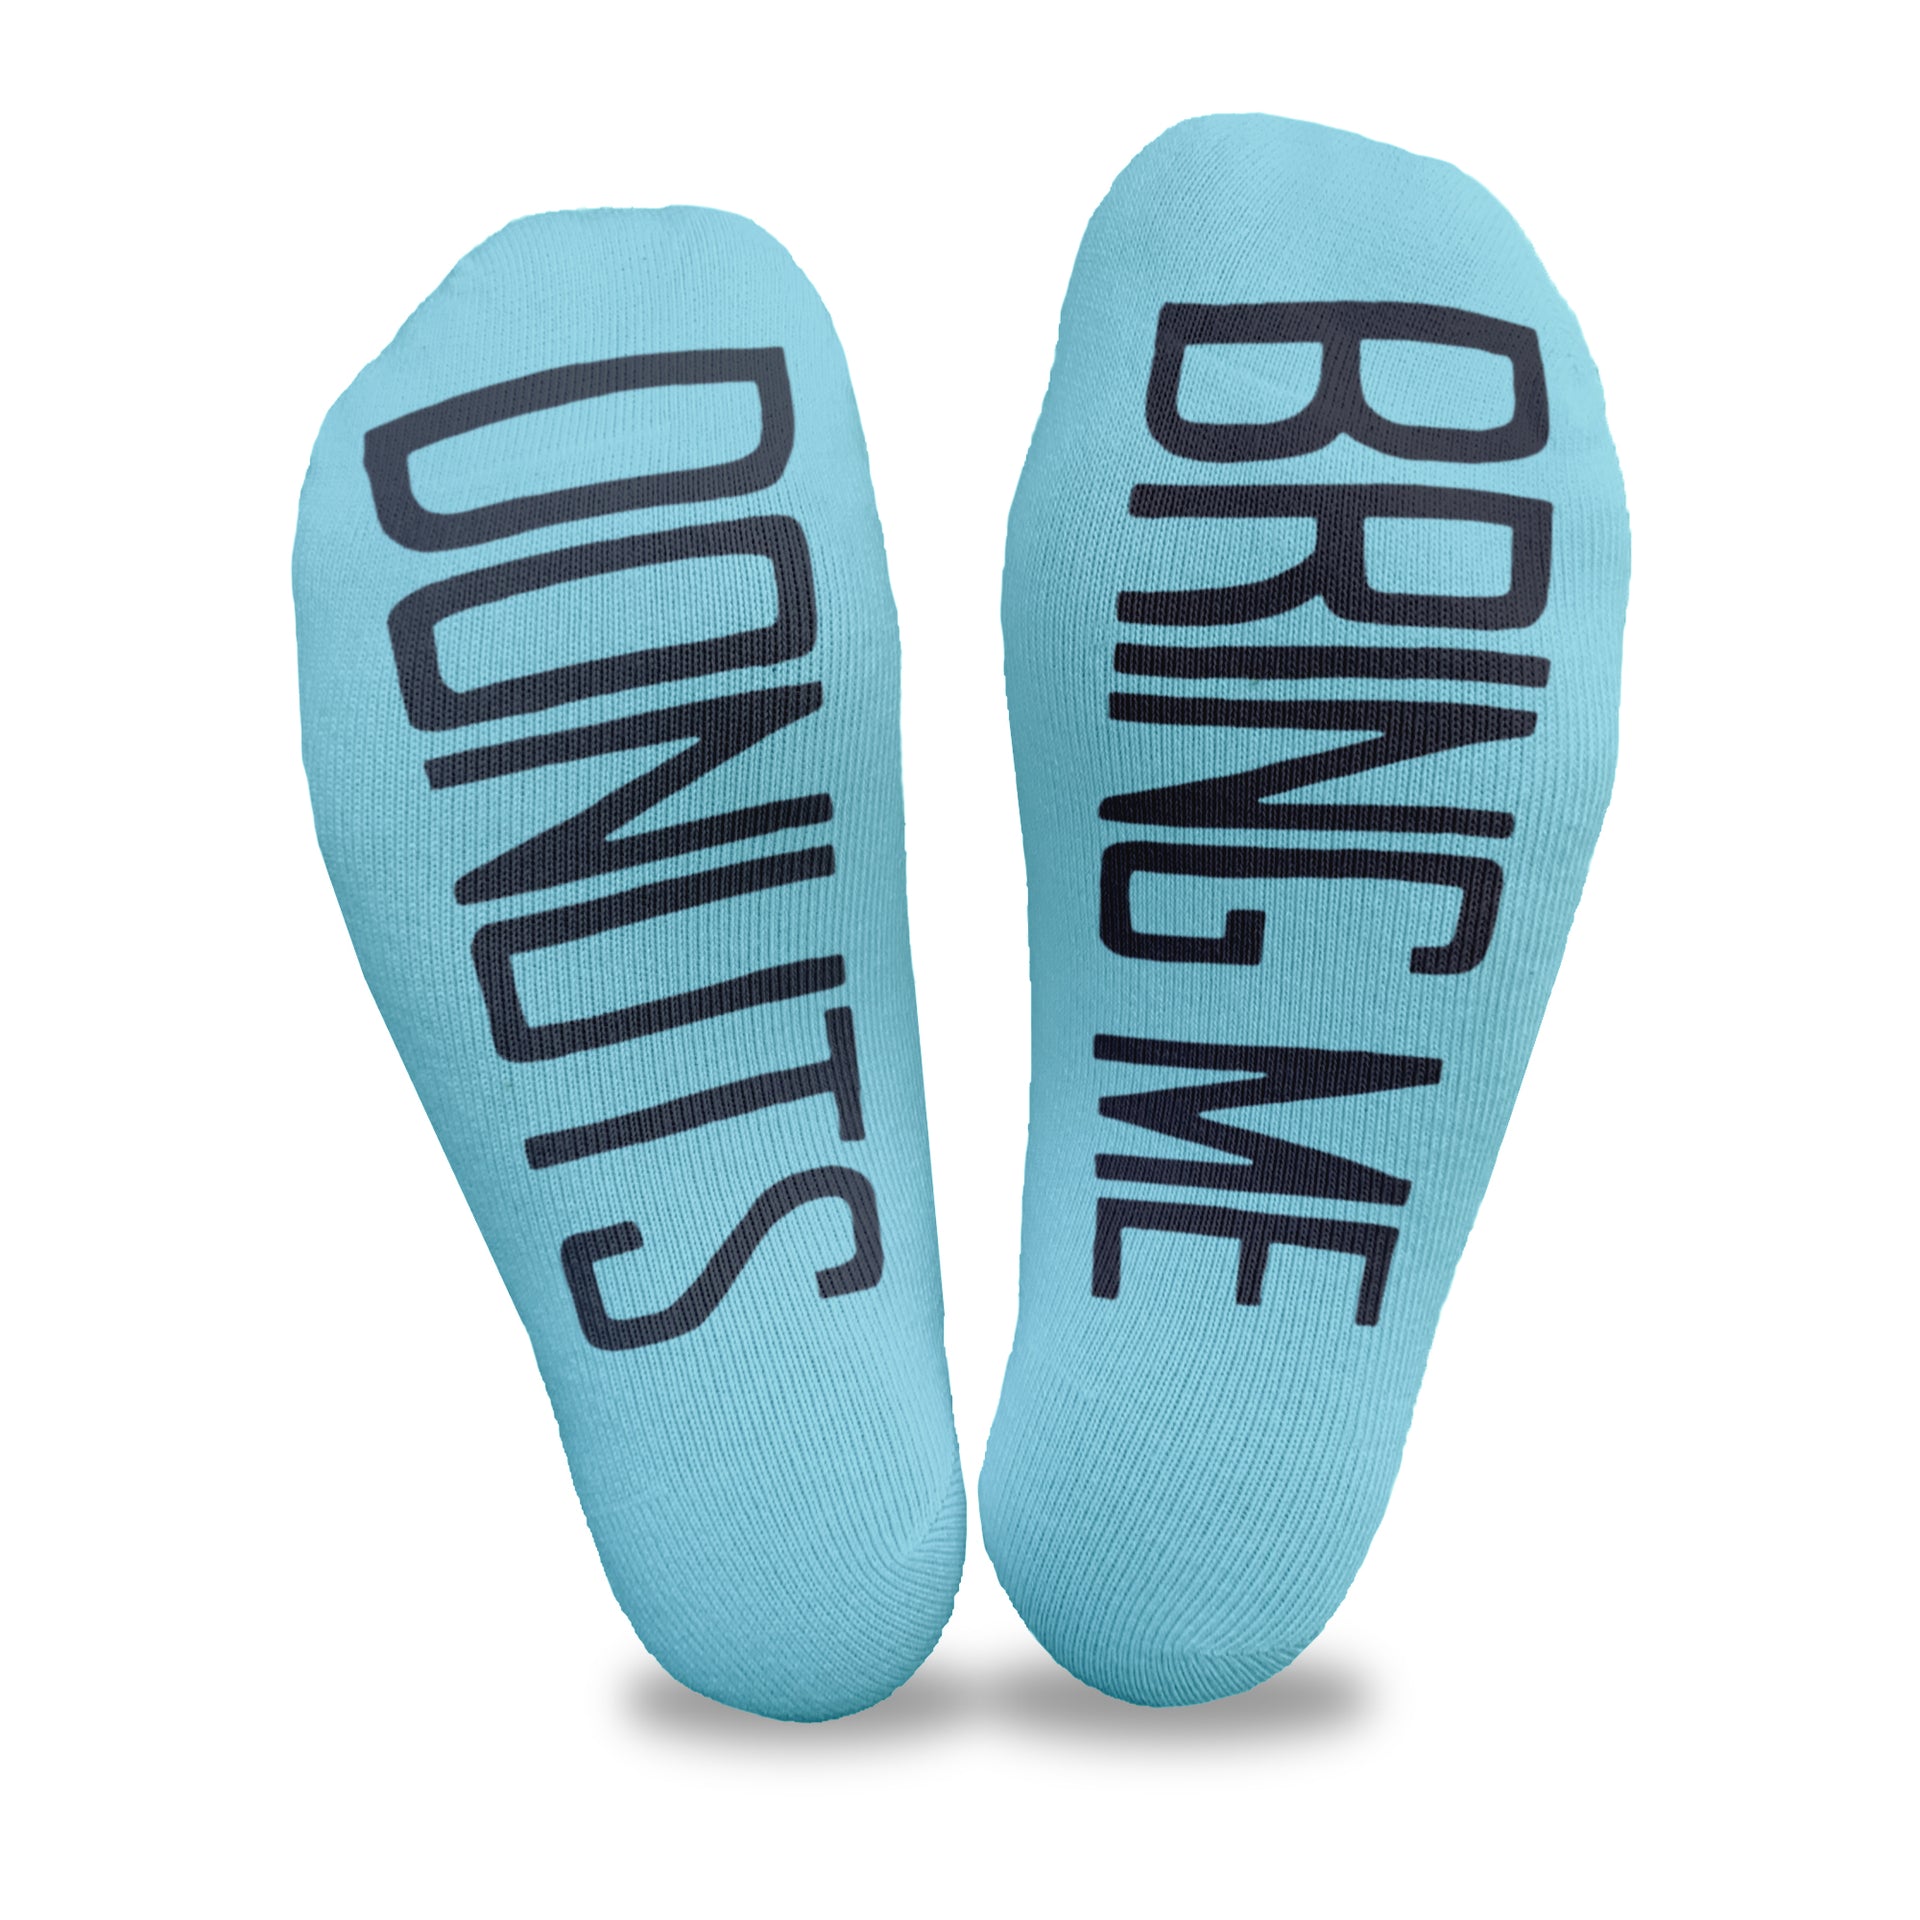 Bring me donuts custom printed on the soles of turquoise cotton no show socks make a great way to get a donut when you want one.